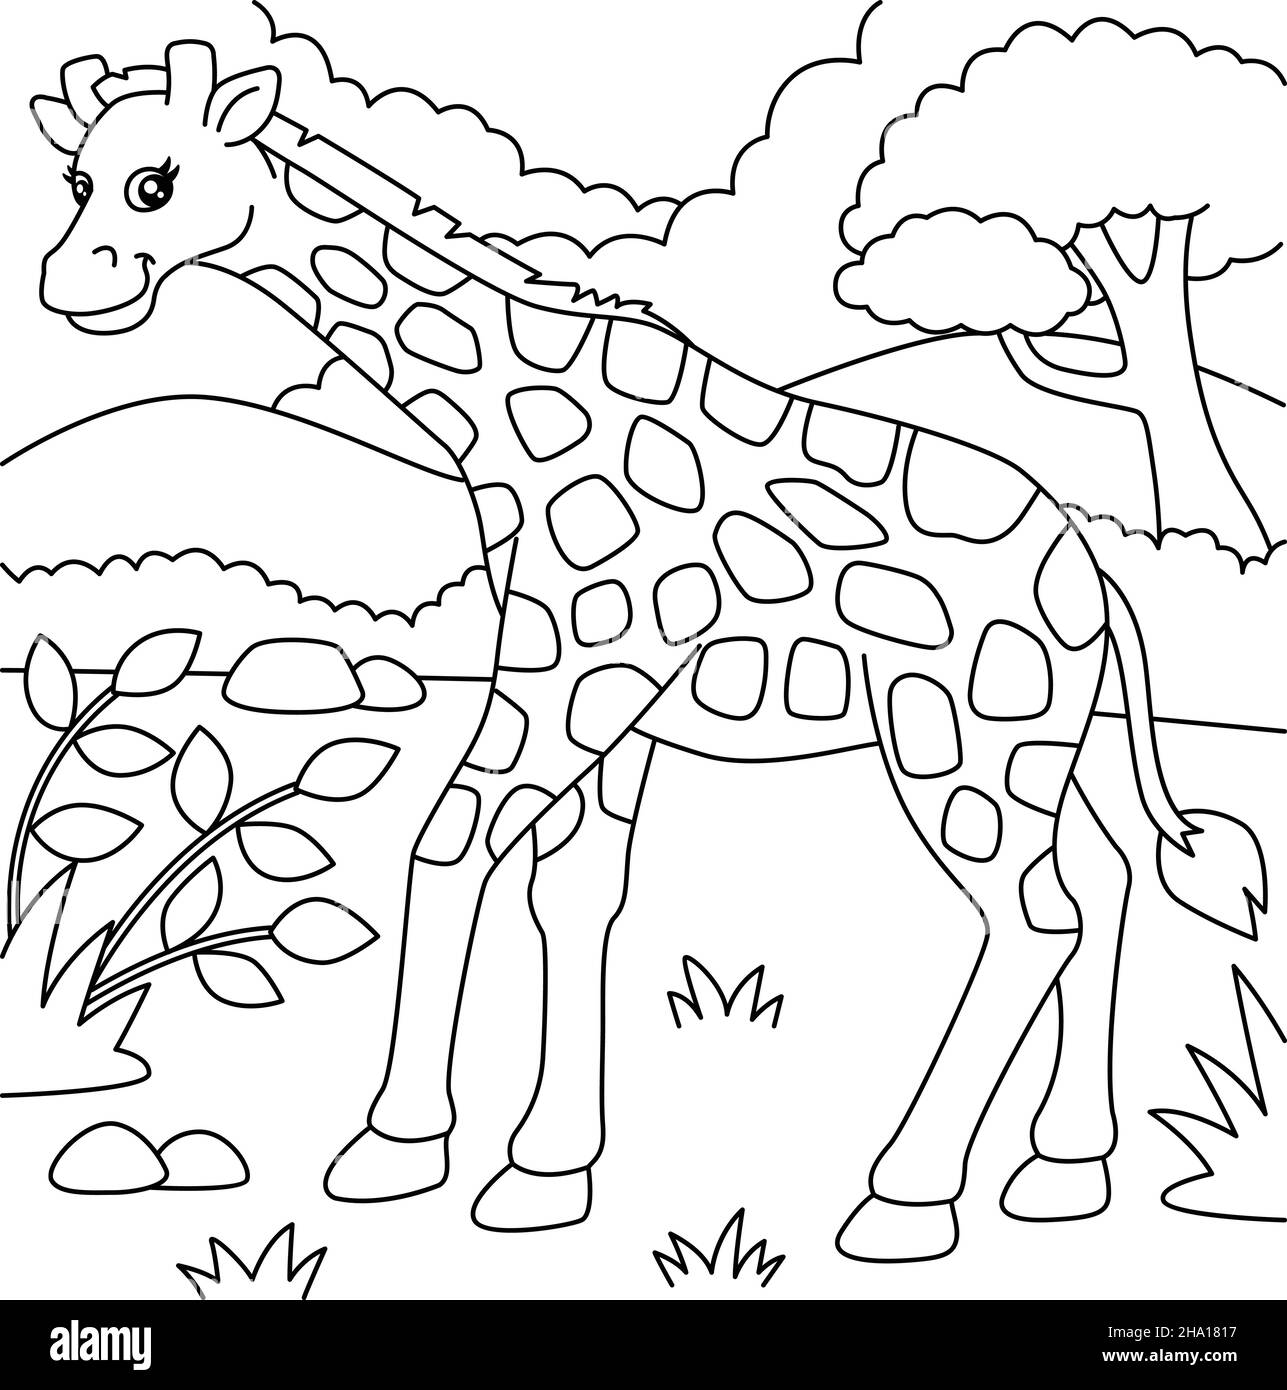 Giraffe Coloring Page for Kids Stock Vector